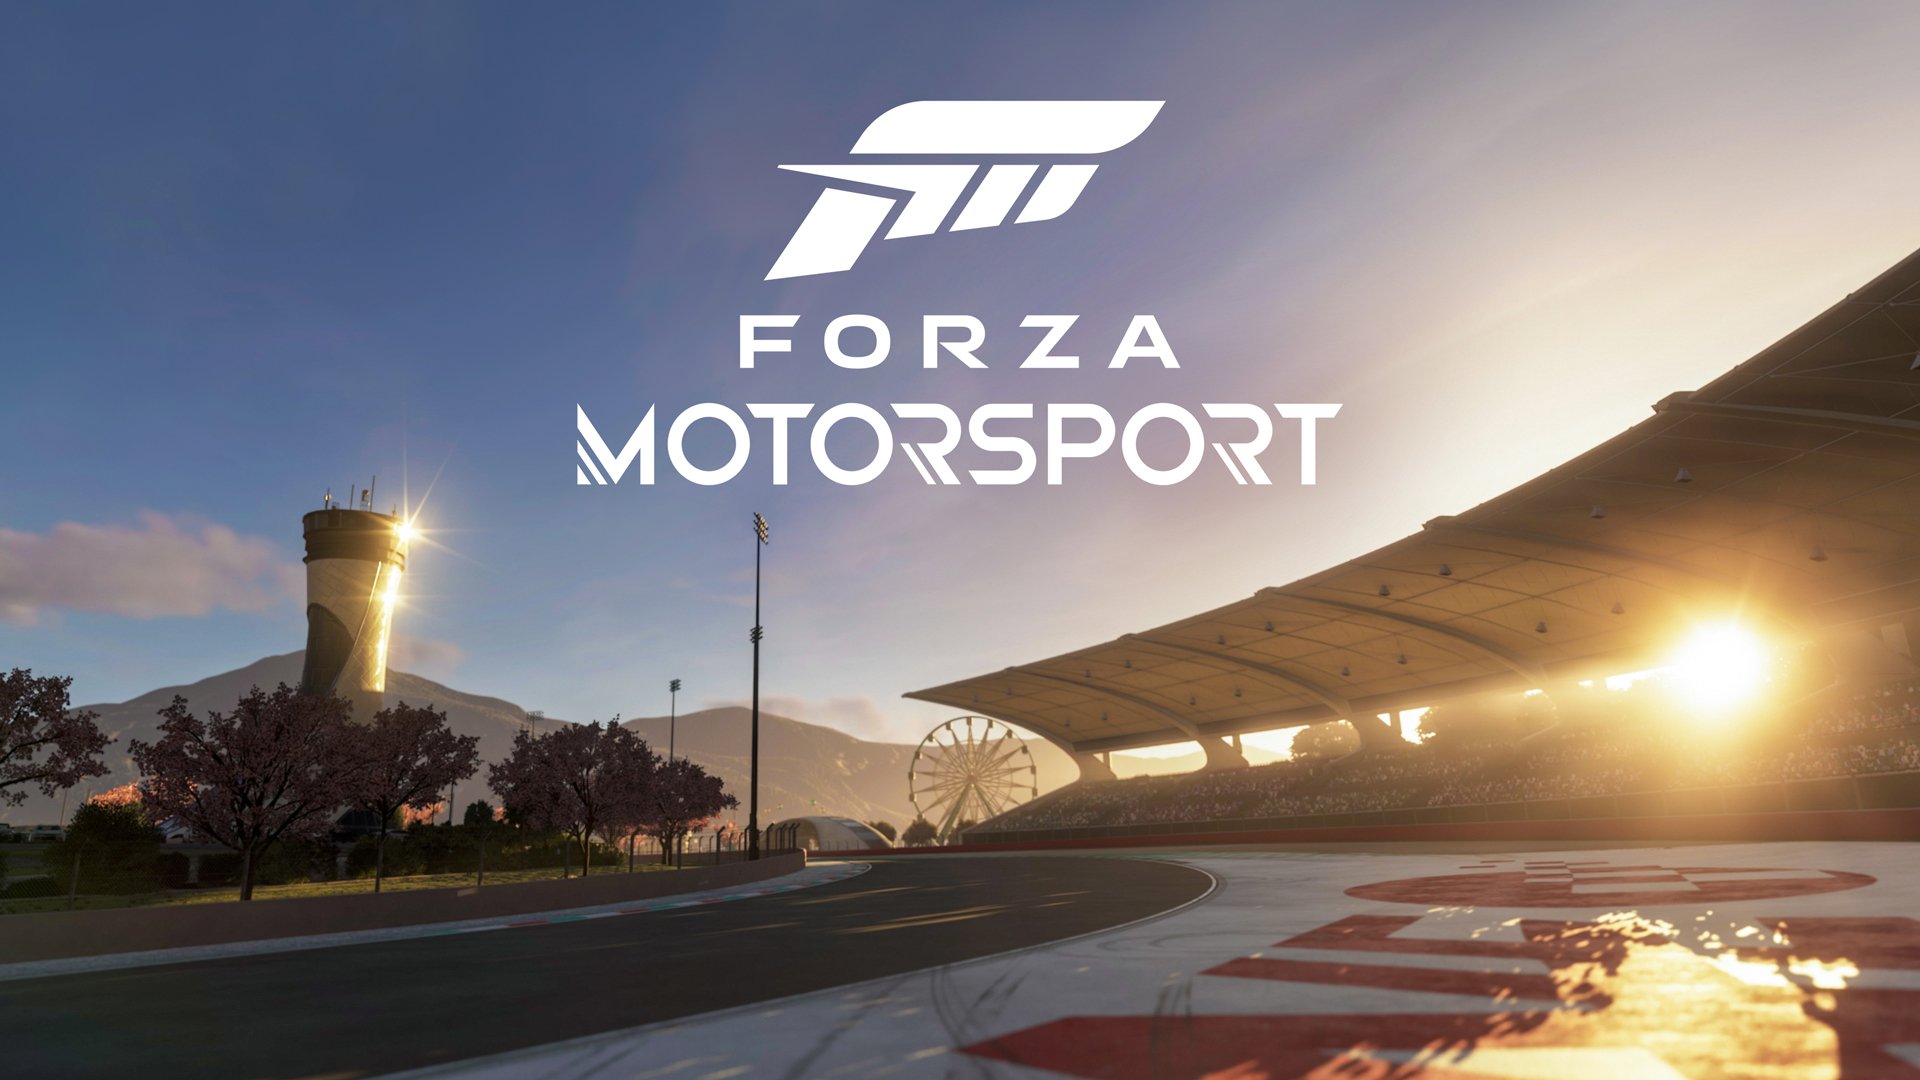 Forza Motorsport is coming back in spring 2023